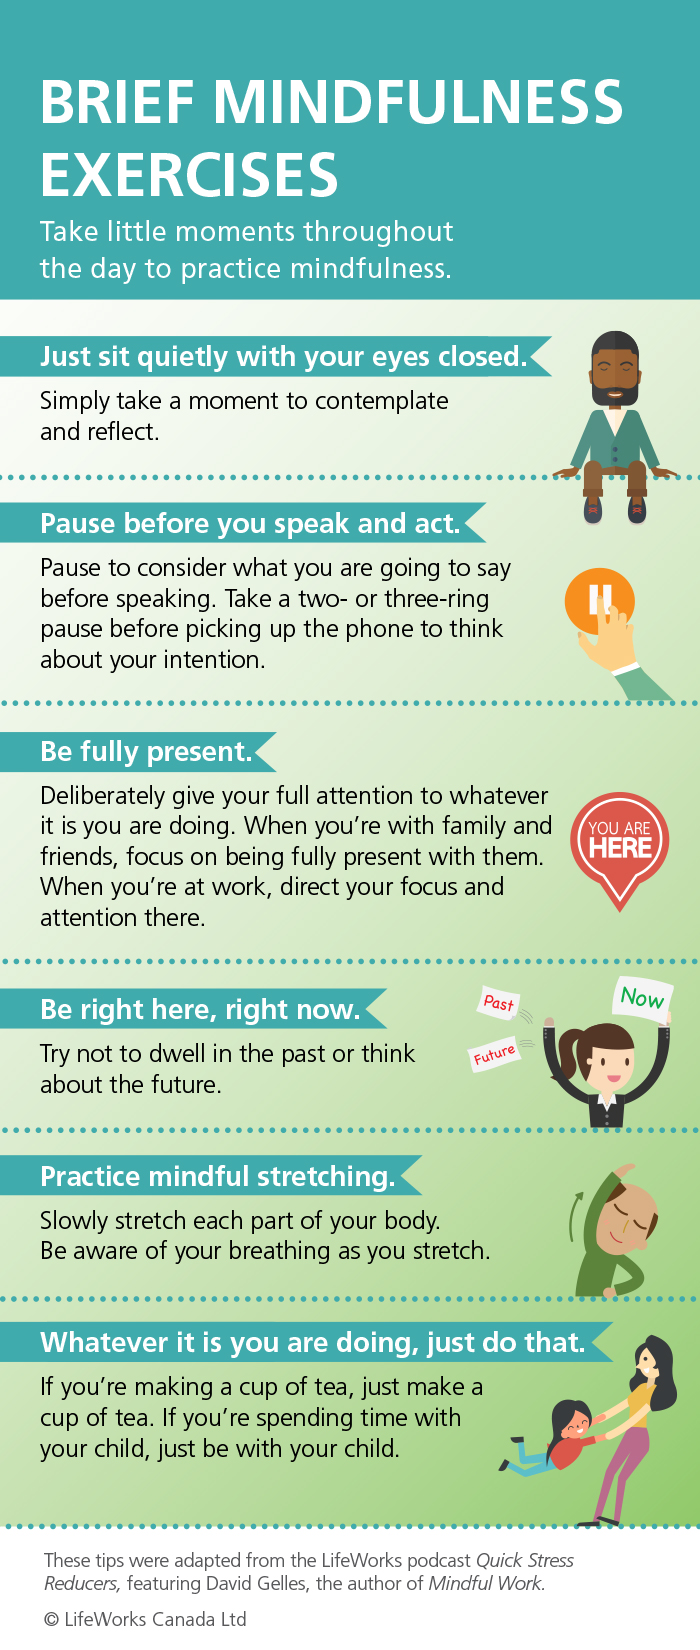 Brief Mindfulness Exercises: sit quietly with your eyes closed; pause before you speak and act; be full present; be right here, right now; practice mindful stretching; whatever it is you're doing, just do that